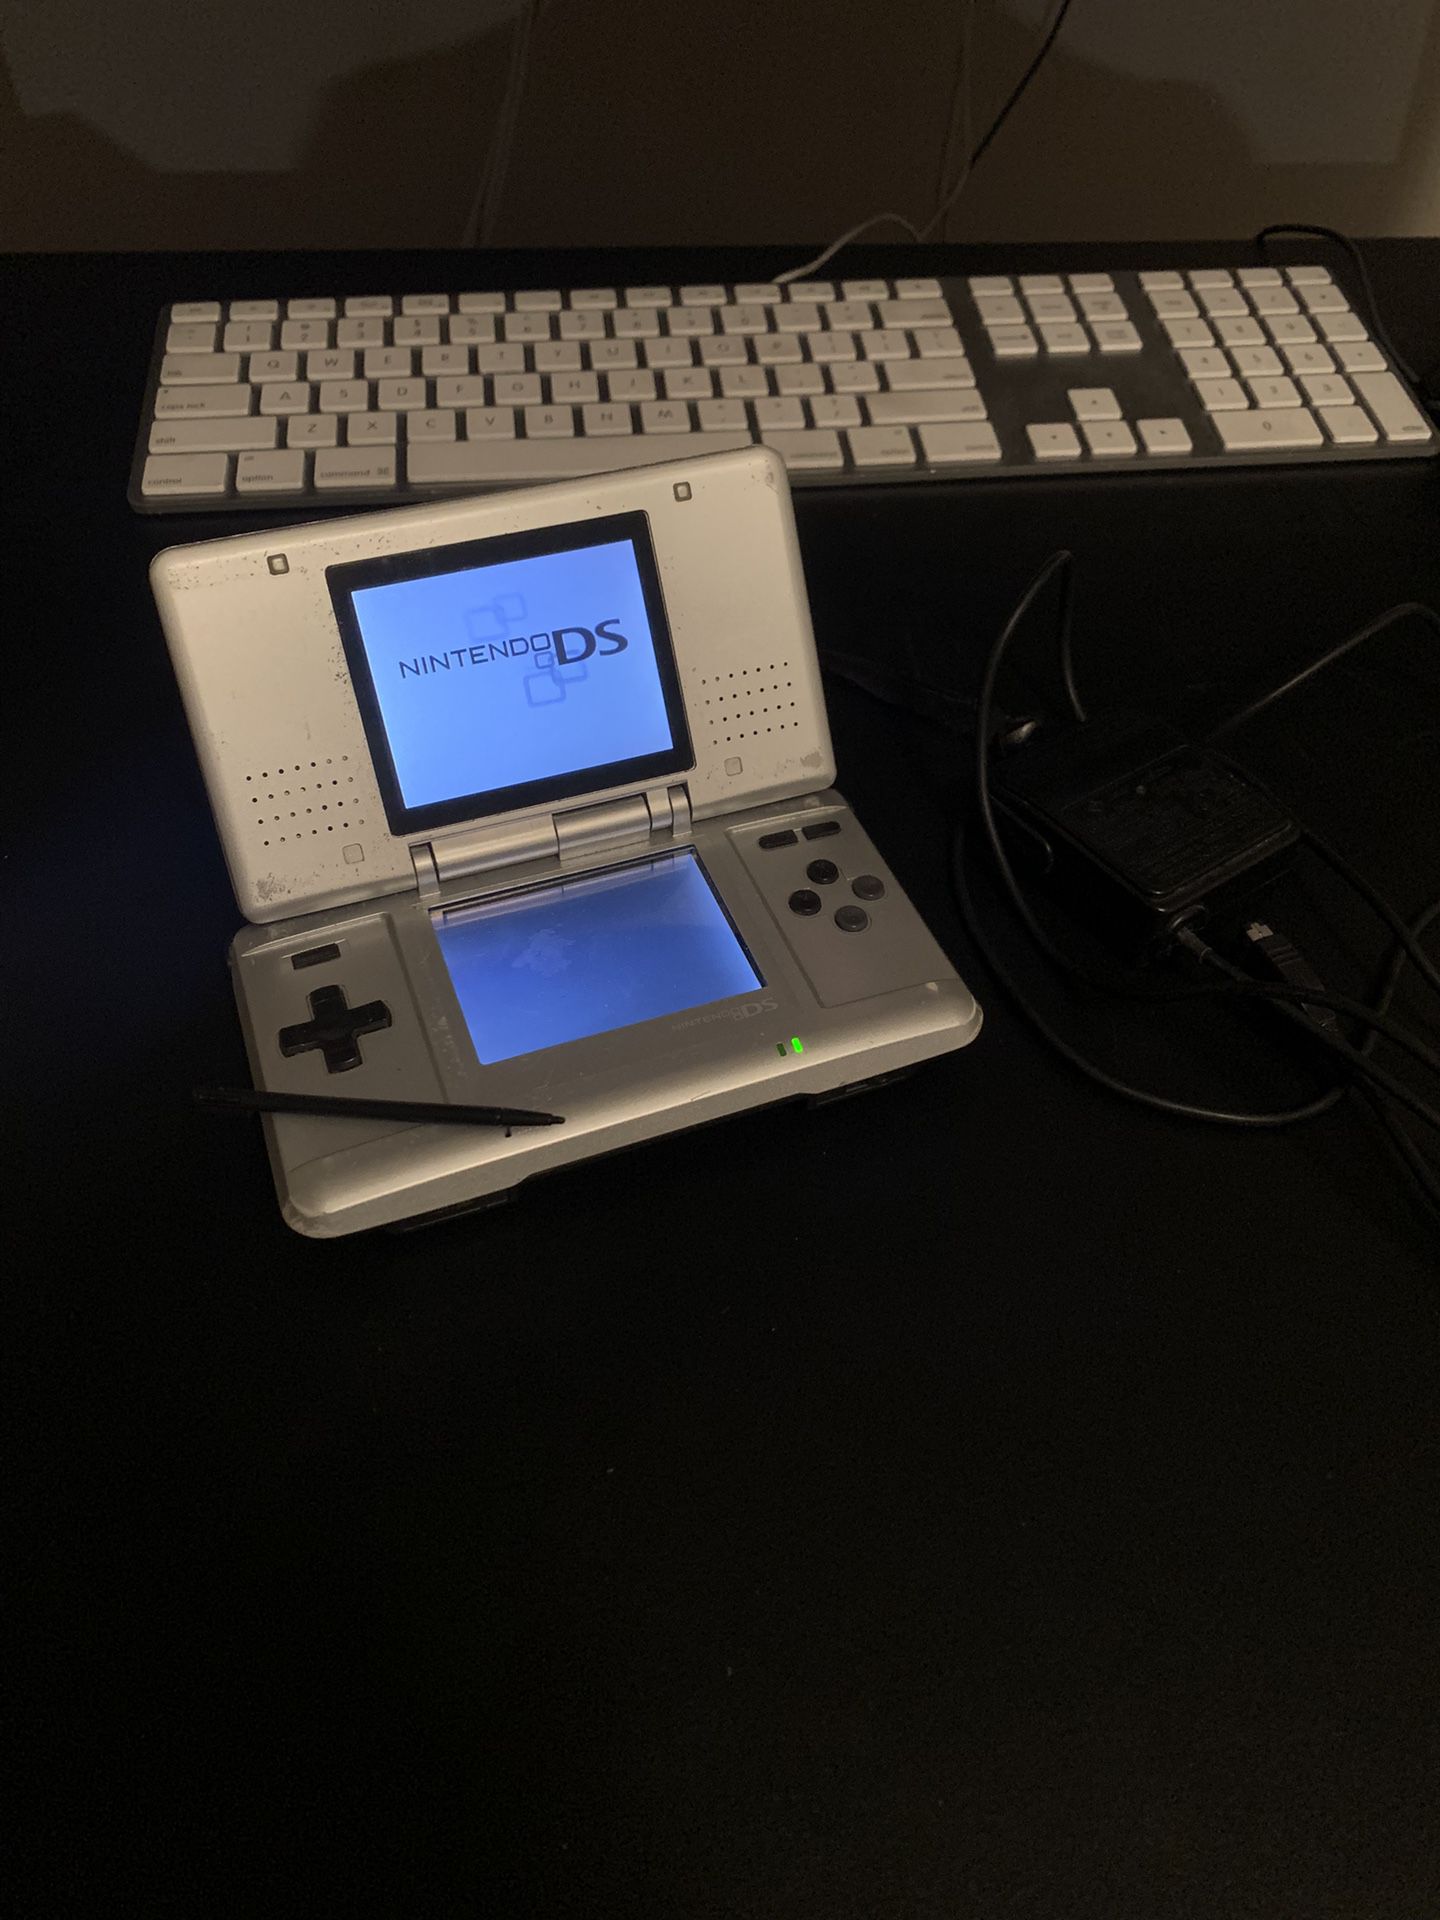 Nintendo DS Original Model W/charger and Stylus